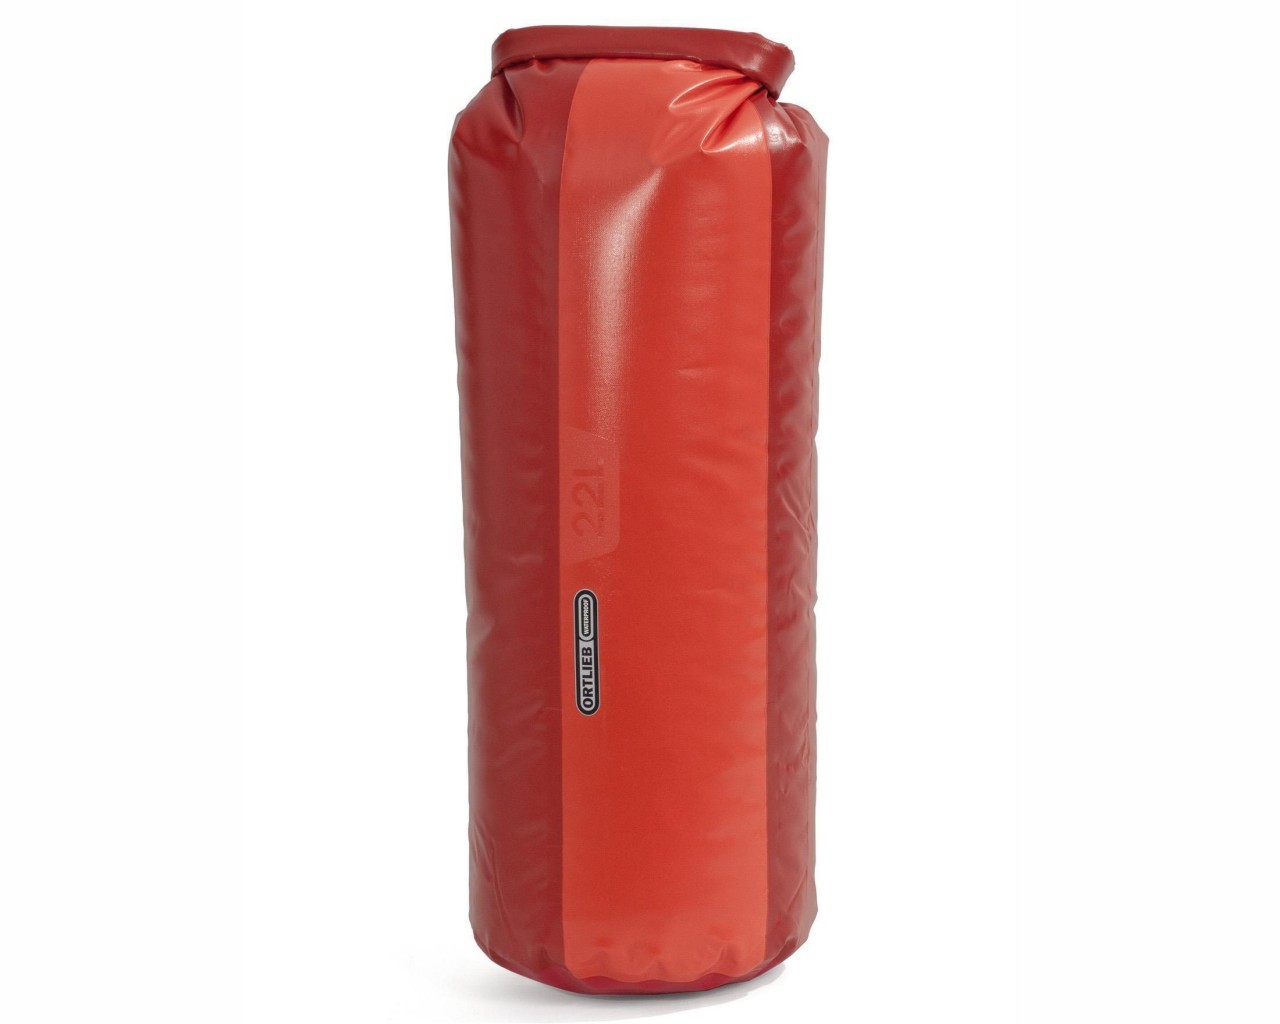 Ortlieb dry bag PD350 - 13 liter | cranberry-signal red